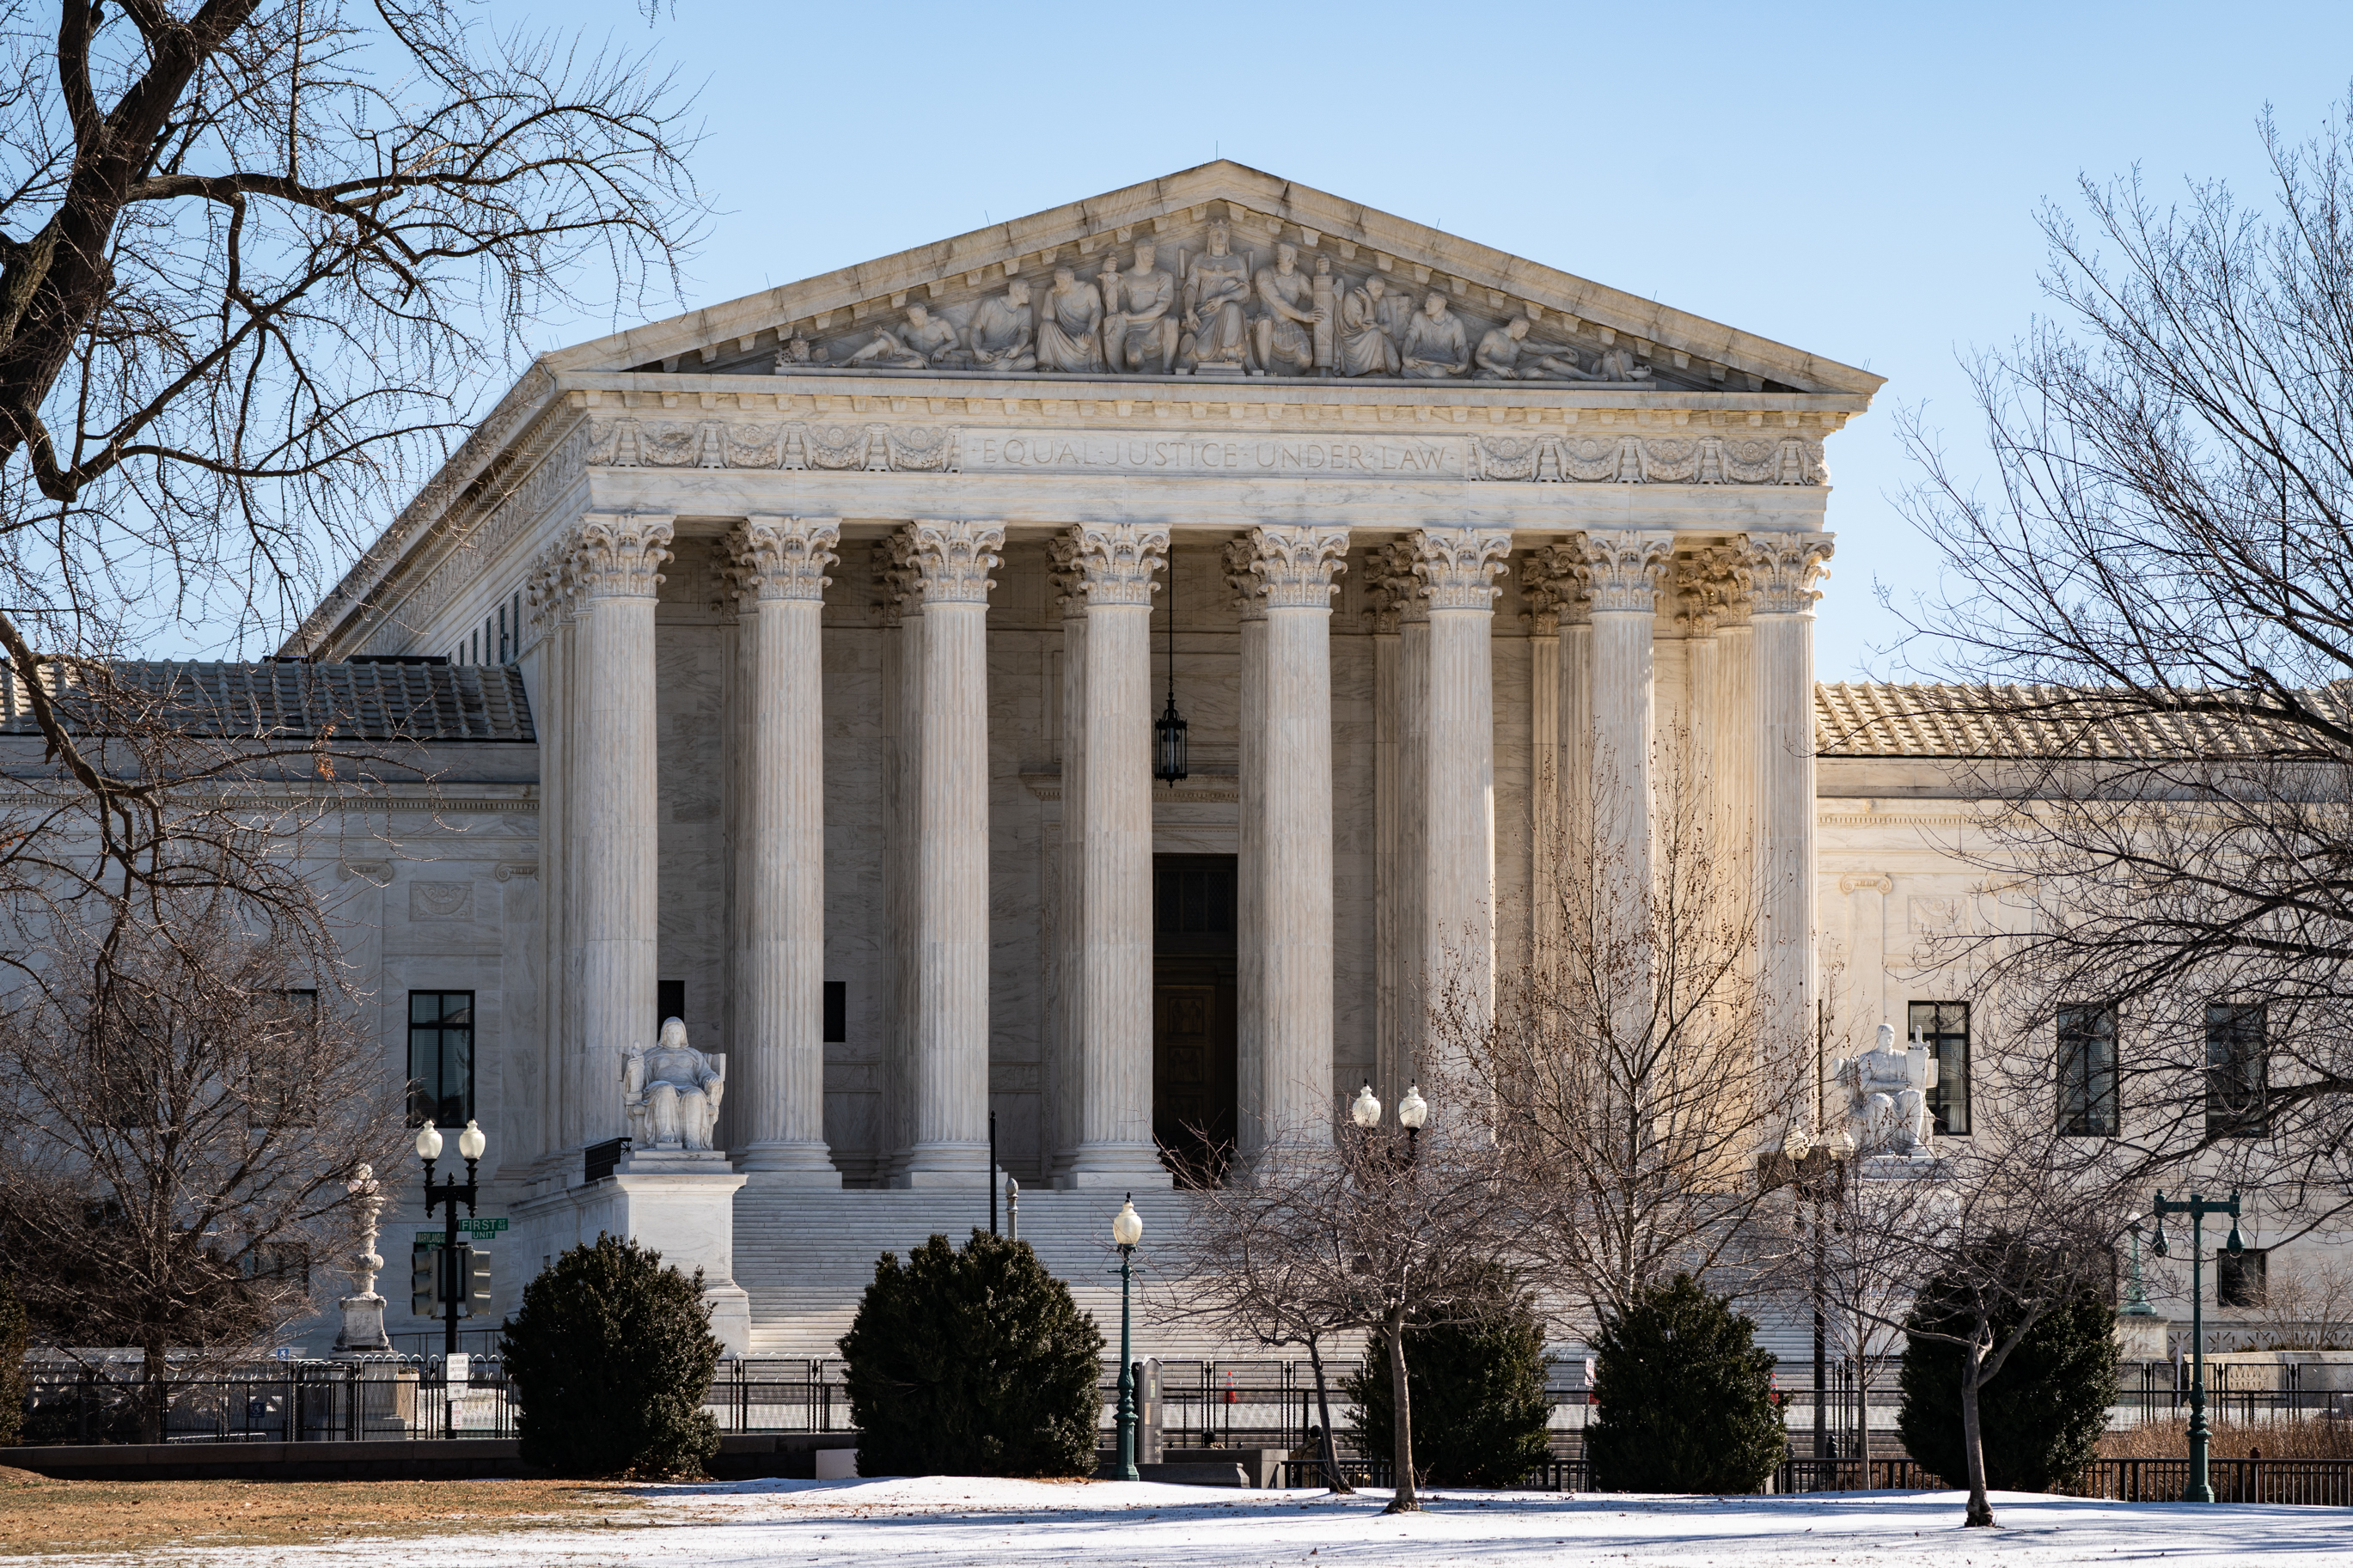 A picture of the United States Supreme Court. Barricades are seen that were erected after the January 6 attack on the US Capitol building.